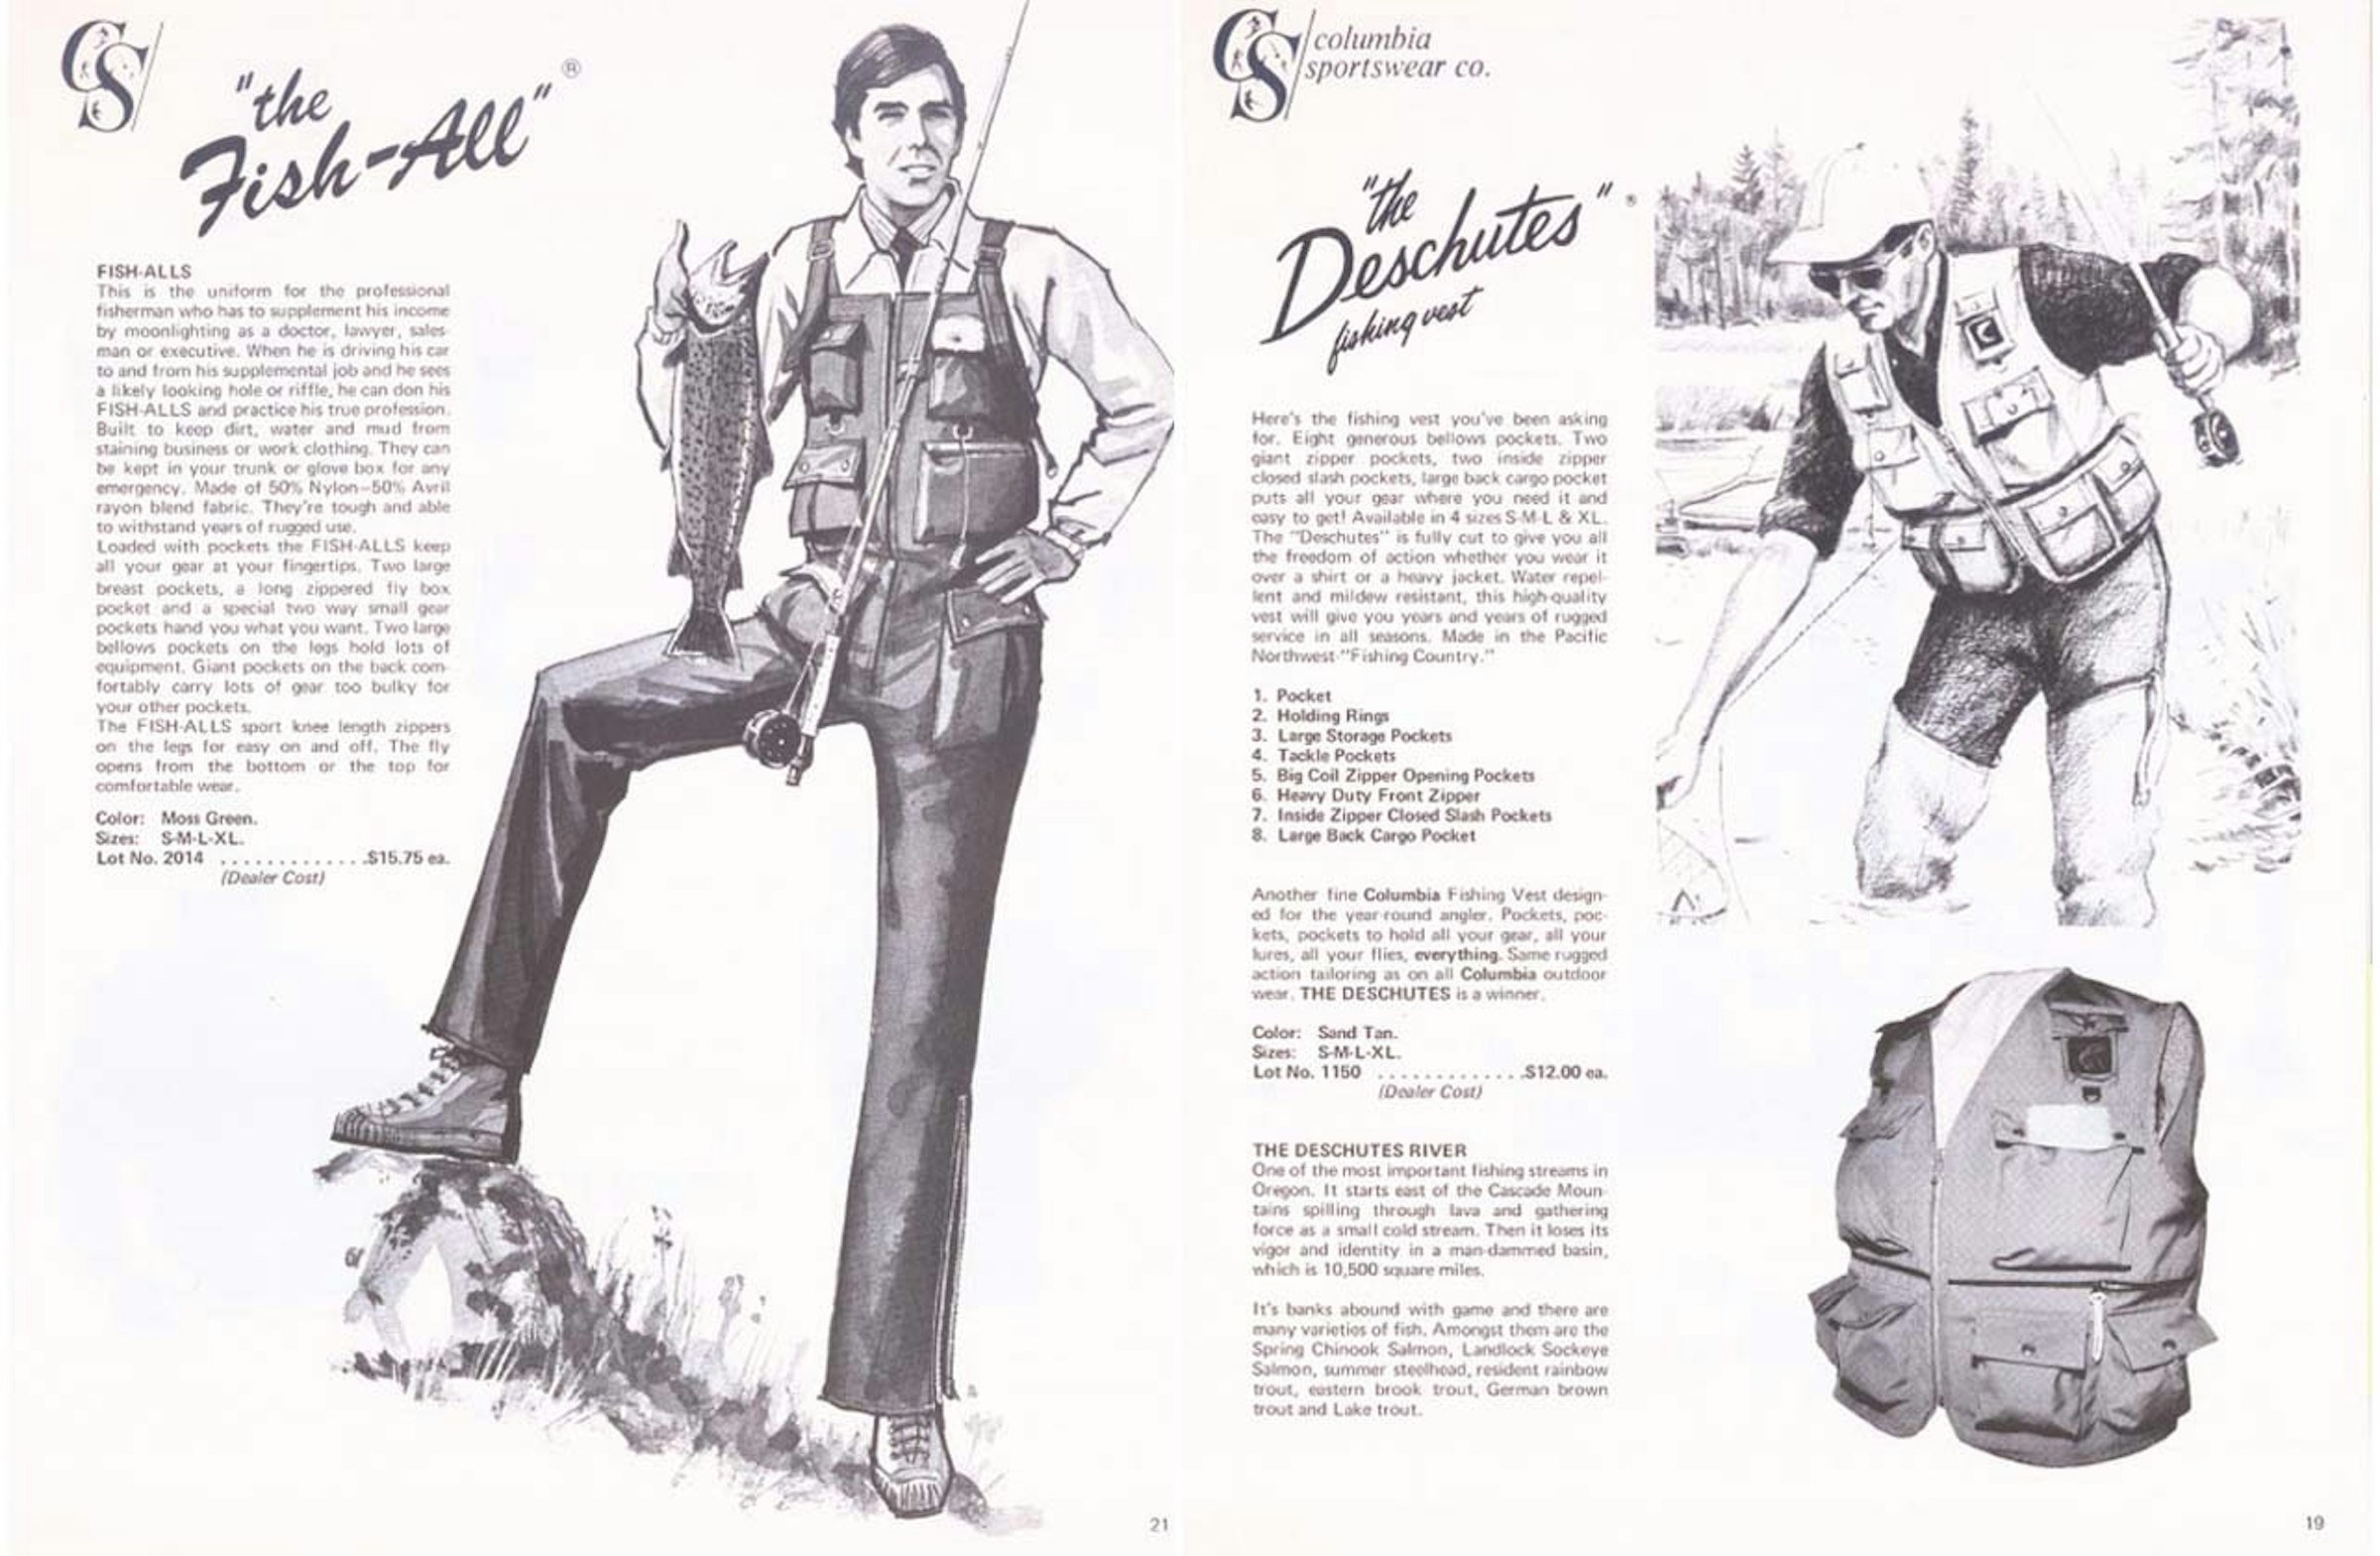 Old advertisement of fishing vest. The image to the left shows the use of loops for rods.